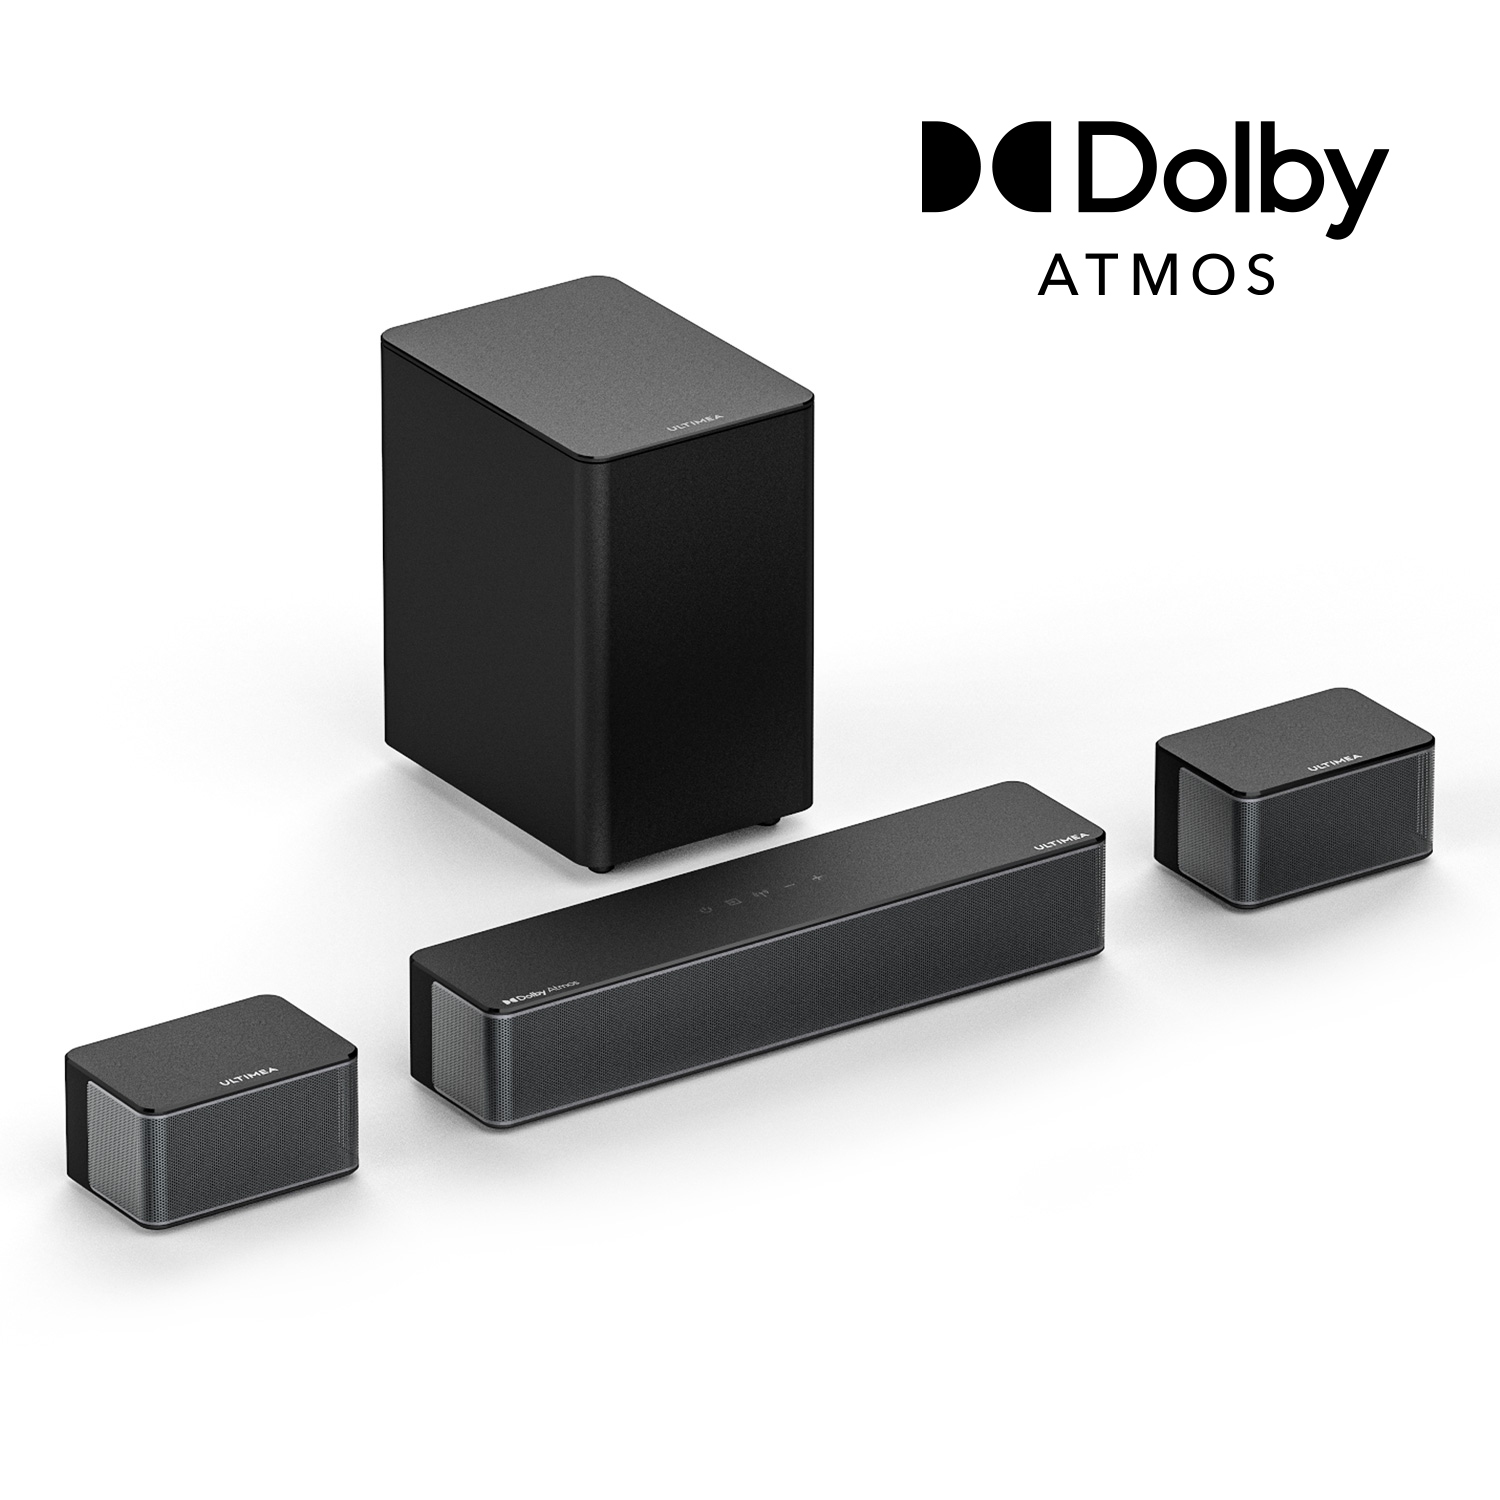 ULTIMEA Poseidon D60 Review: Best Budget Dolby Atmos Virtual 5.1